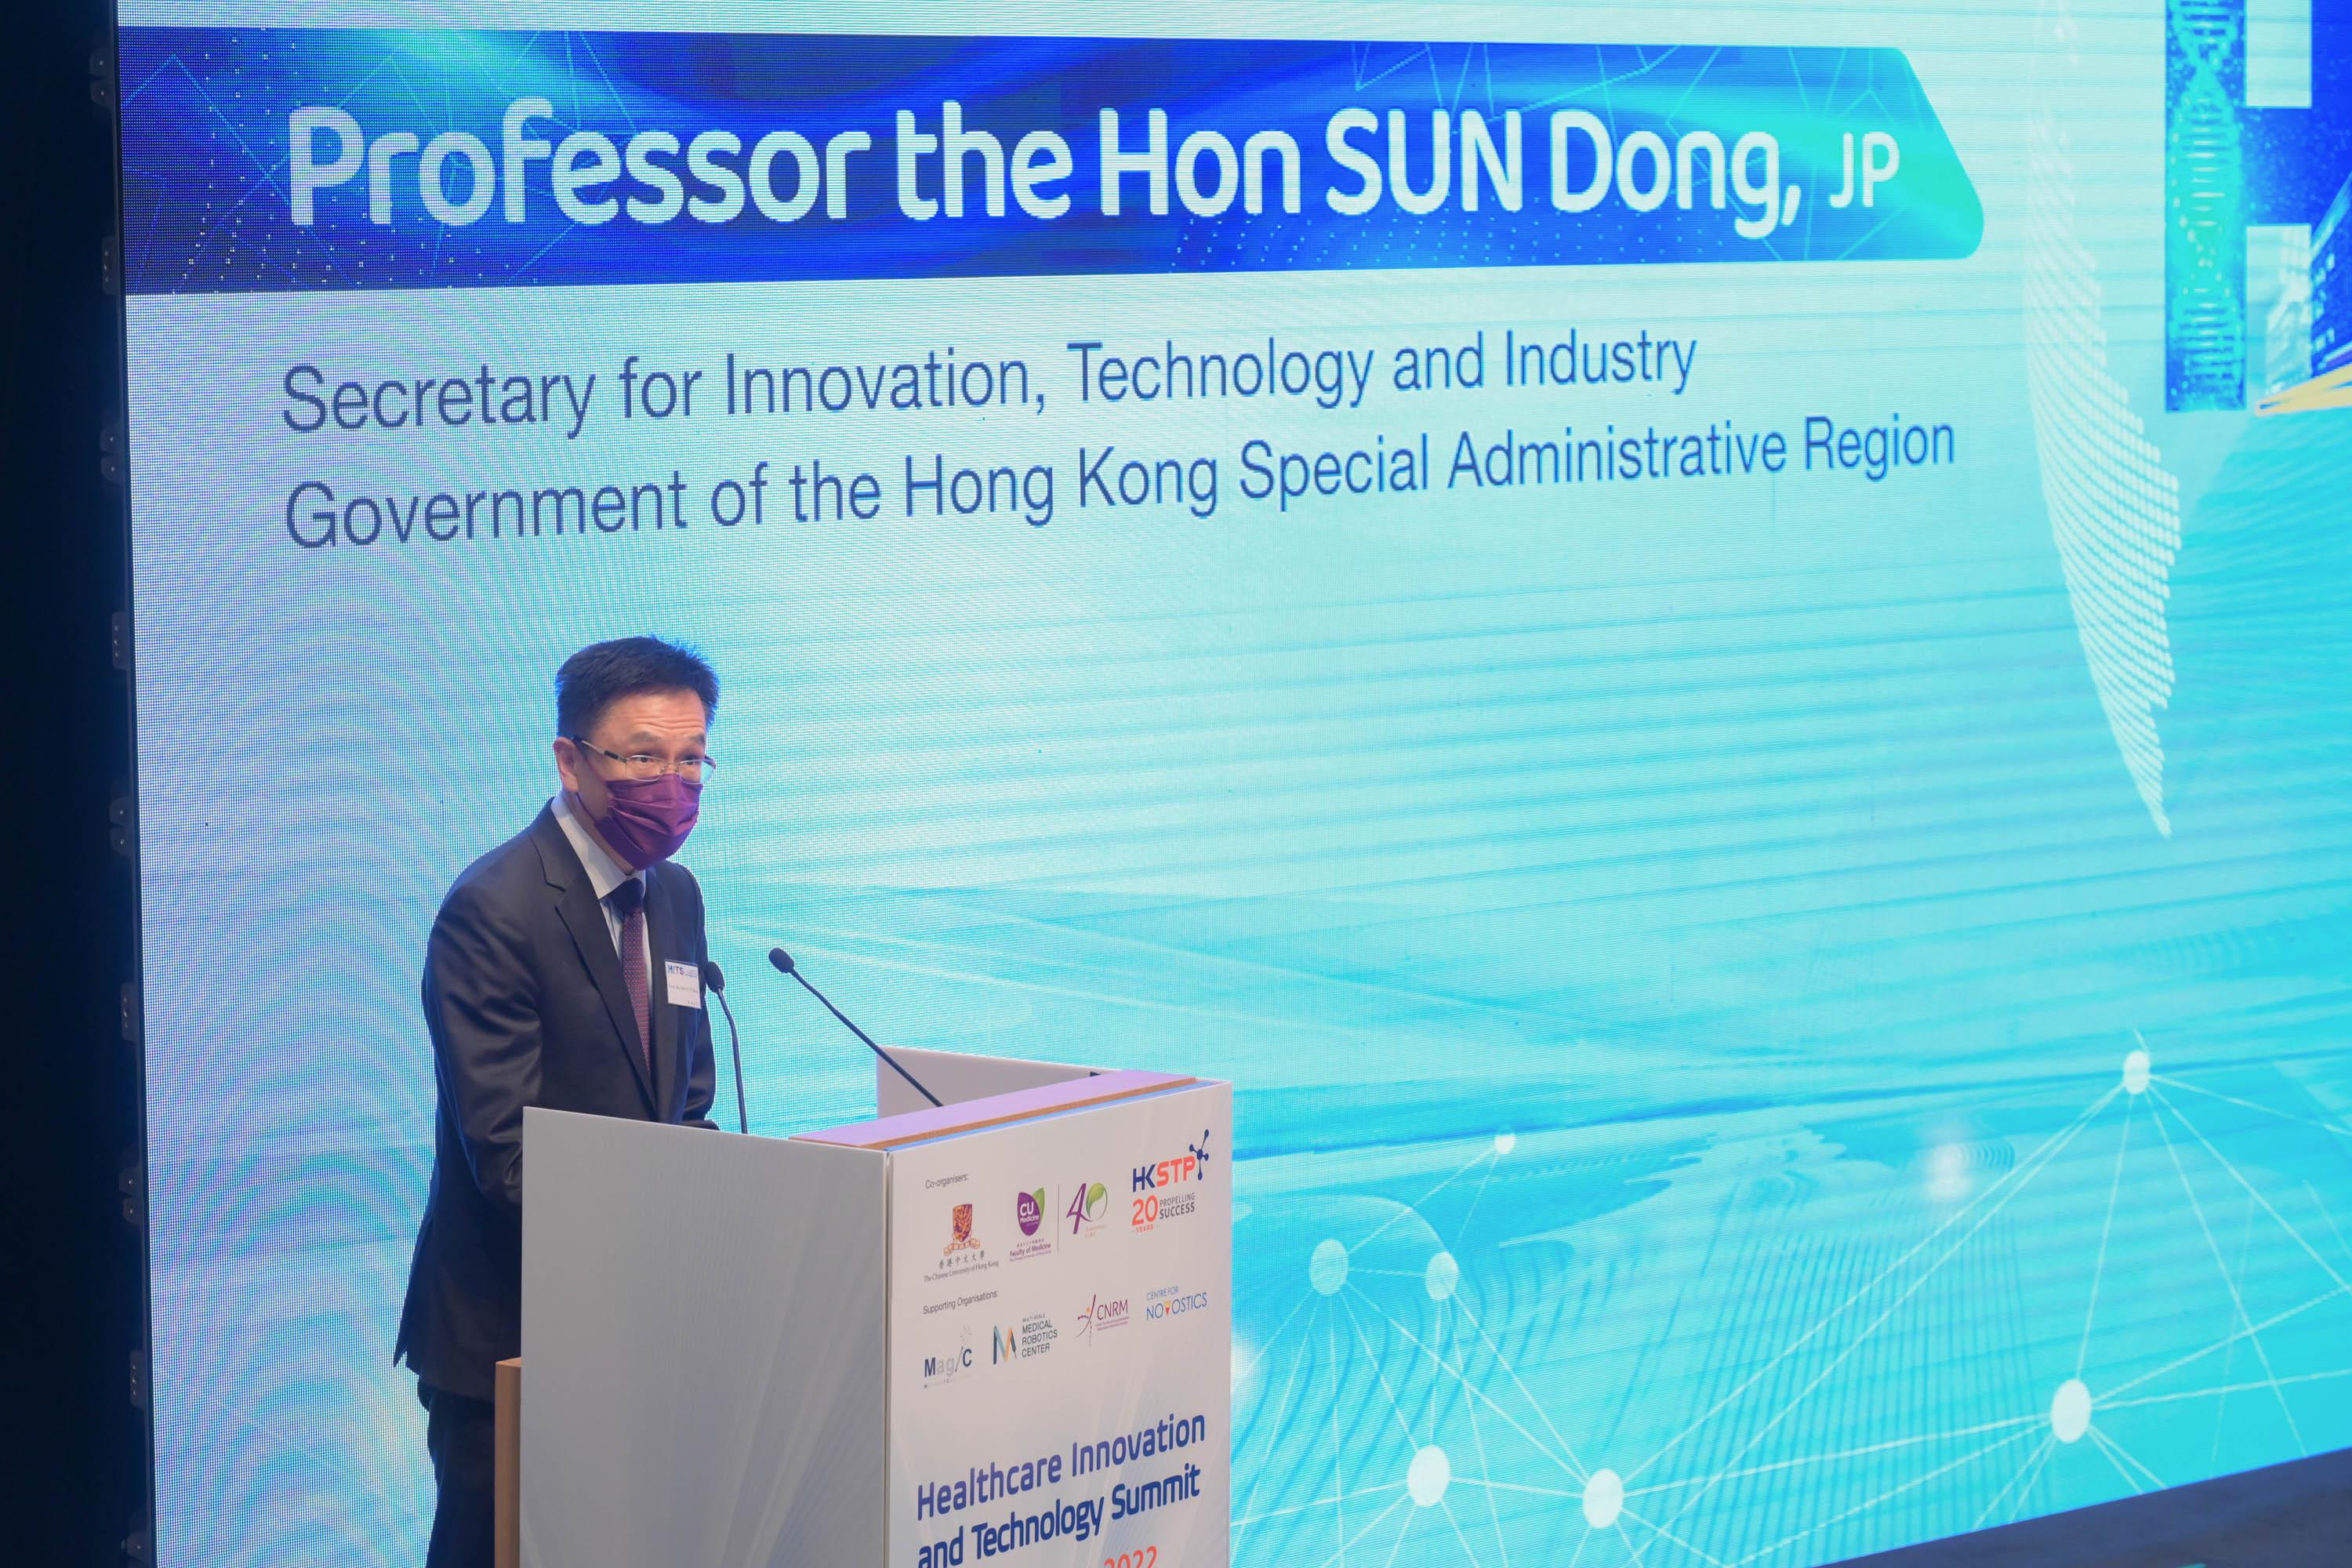 The Secretary for Innovation, Technology and Industry, Professor Sun Dong, delivers opening address at the Healthcare Innovation and Technology Summit 2022 today (October 14).